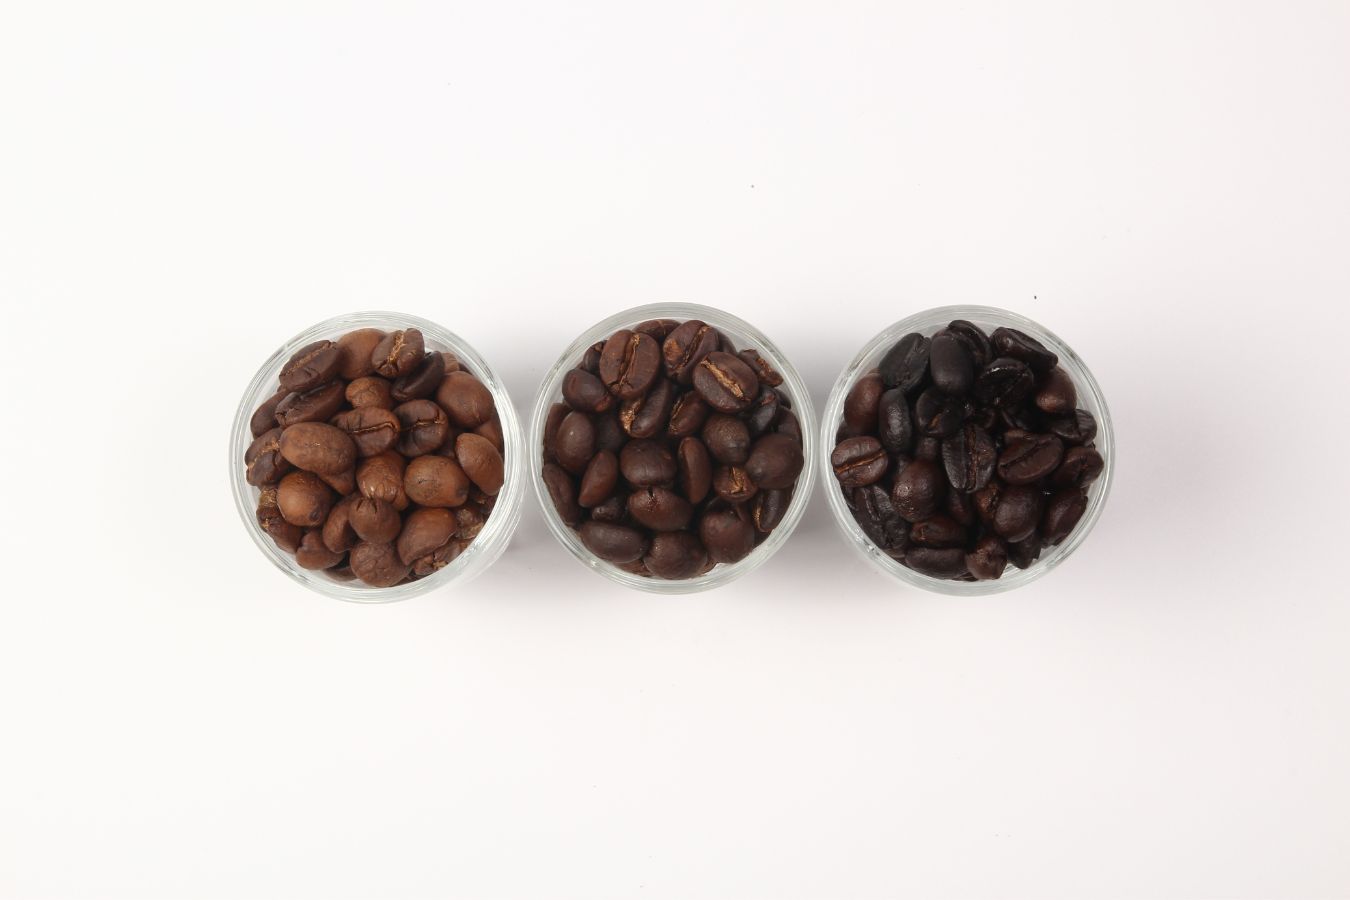 Basic Coffee Roasting The Process of Changing Flavor When Roasting Coffee